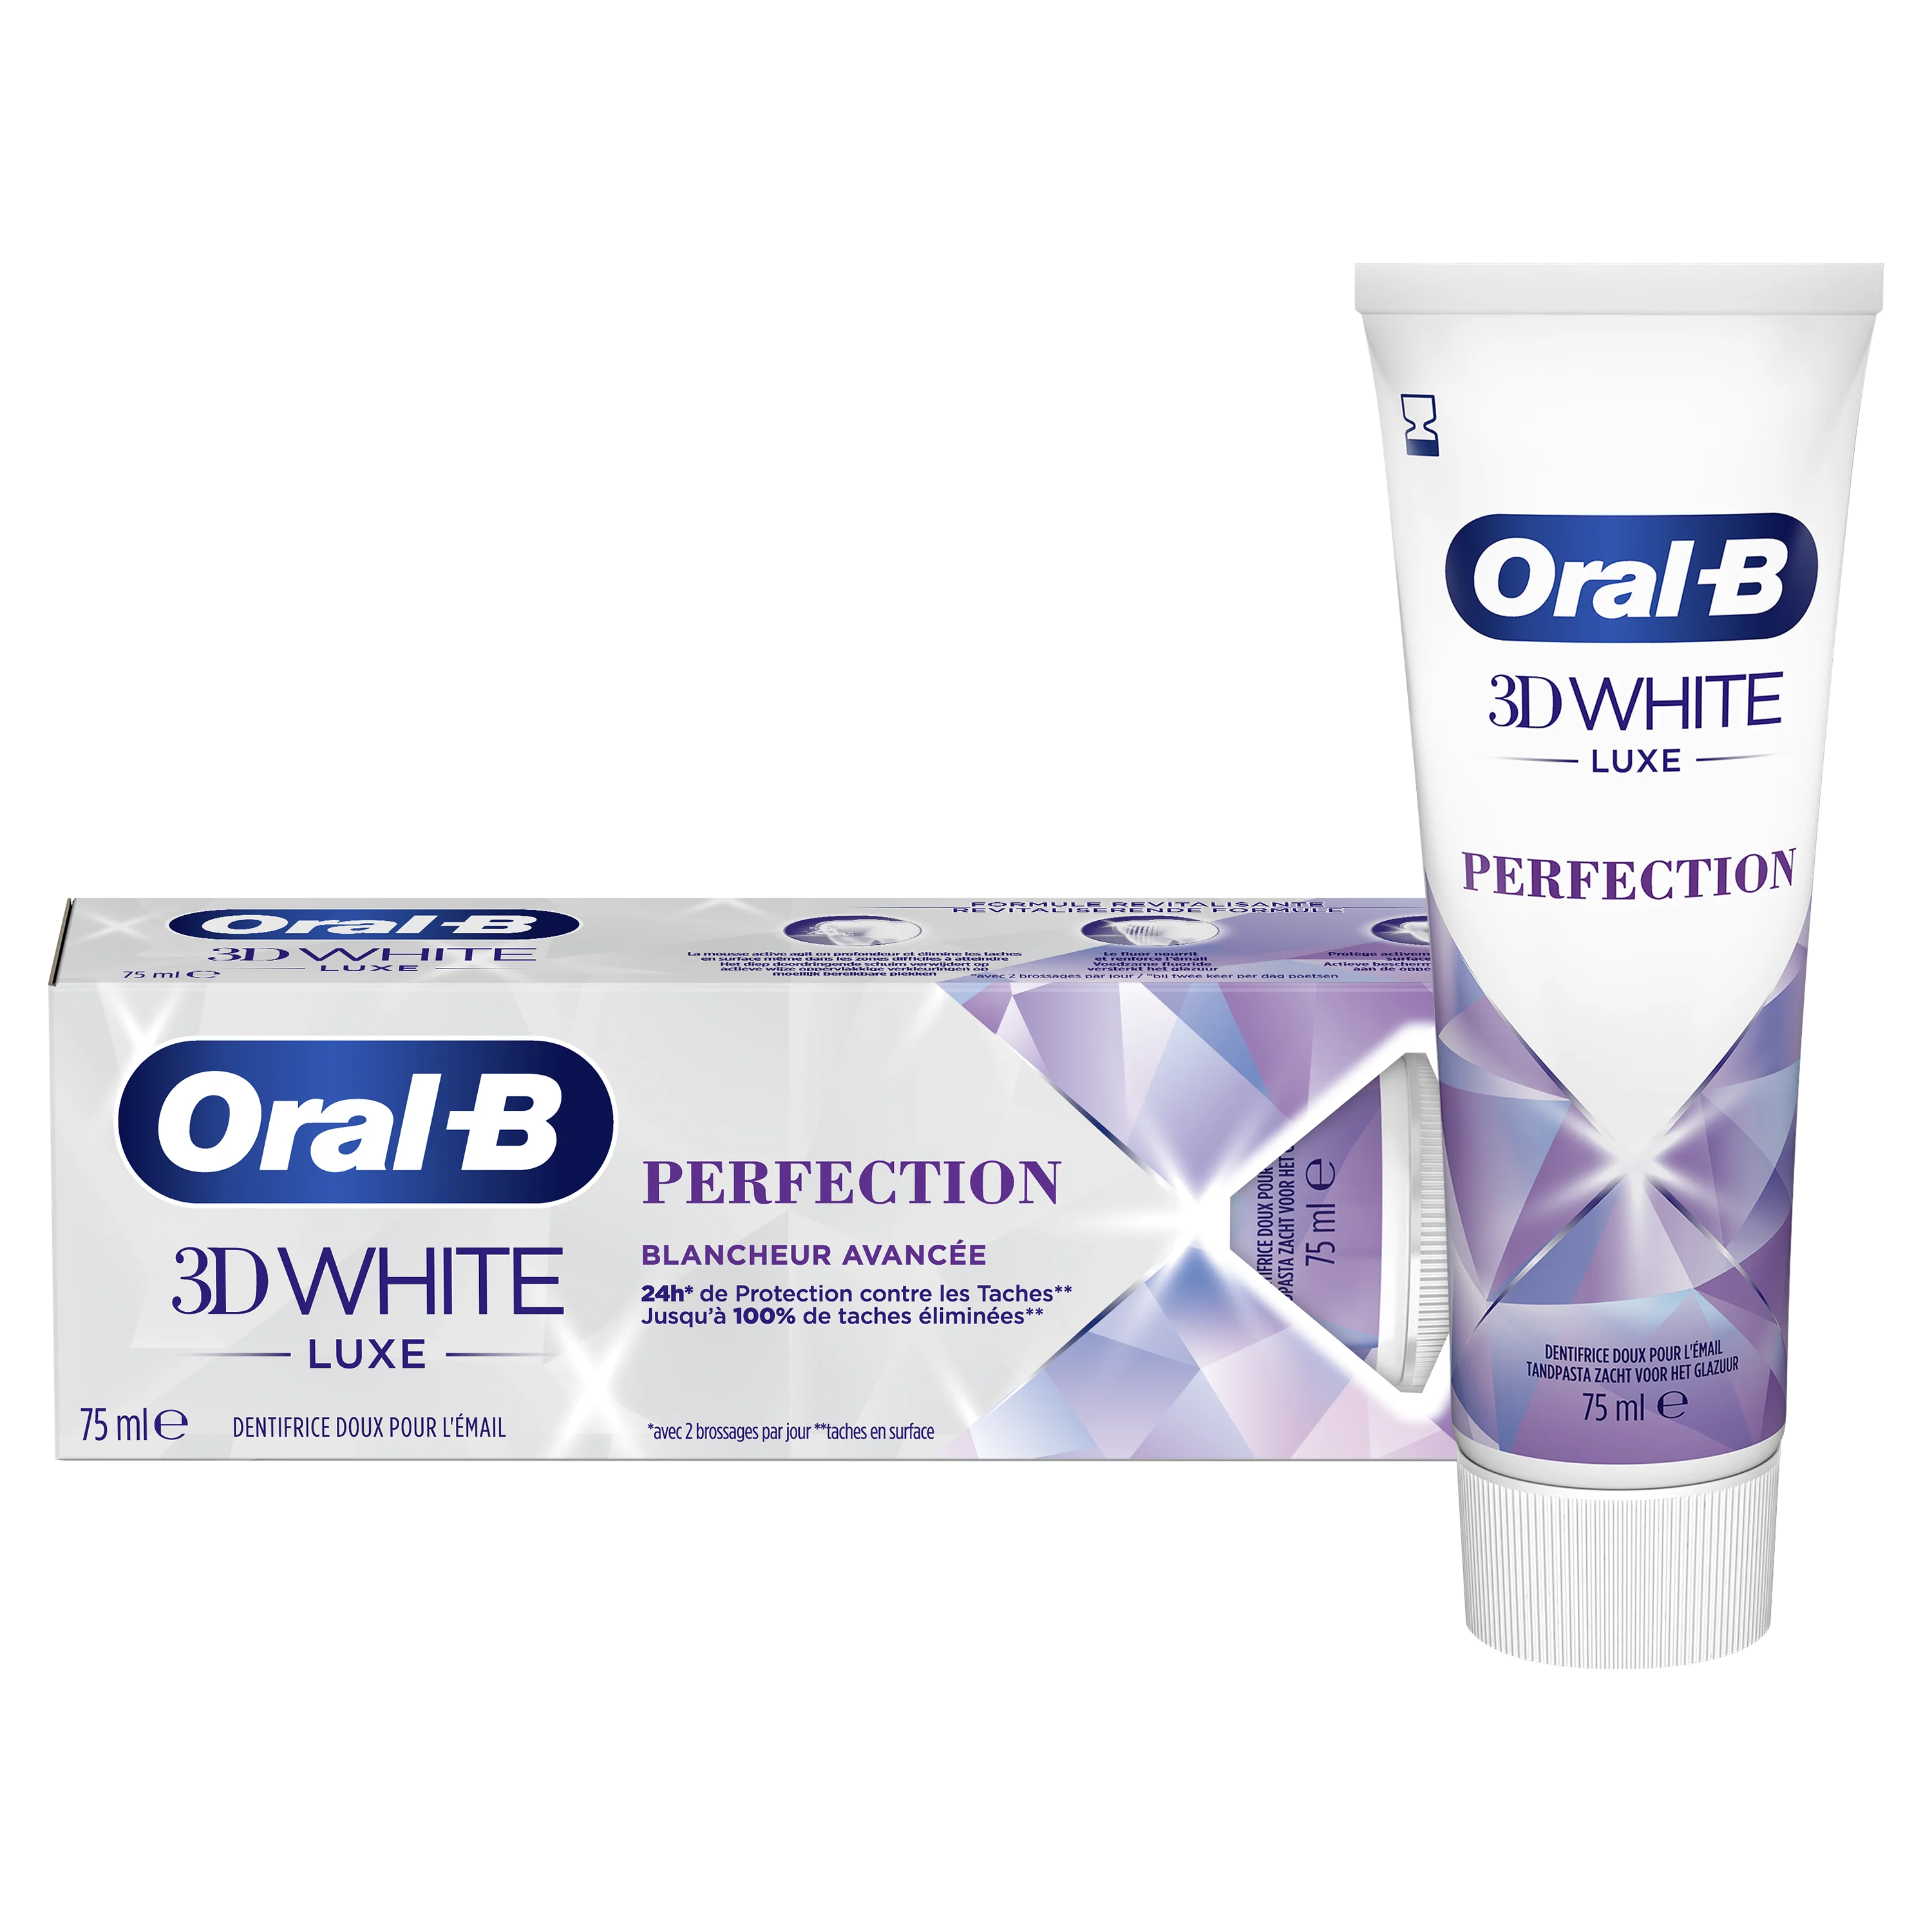 Oral-B 3D White Luxe Perfection | Oral-B